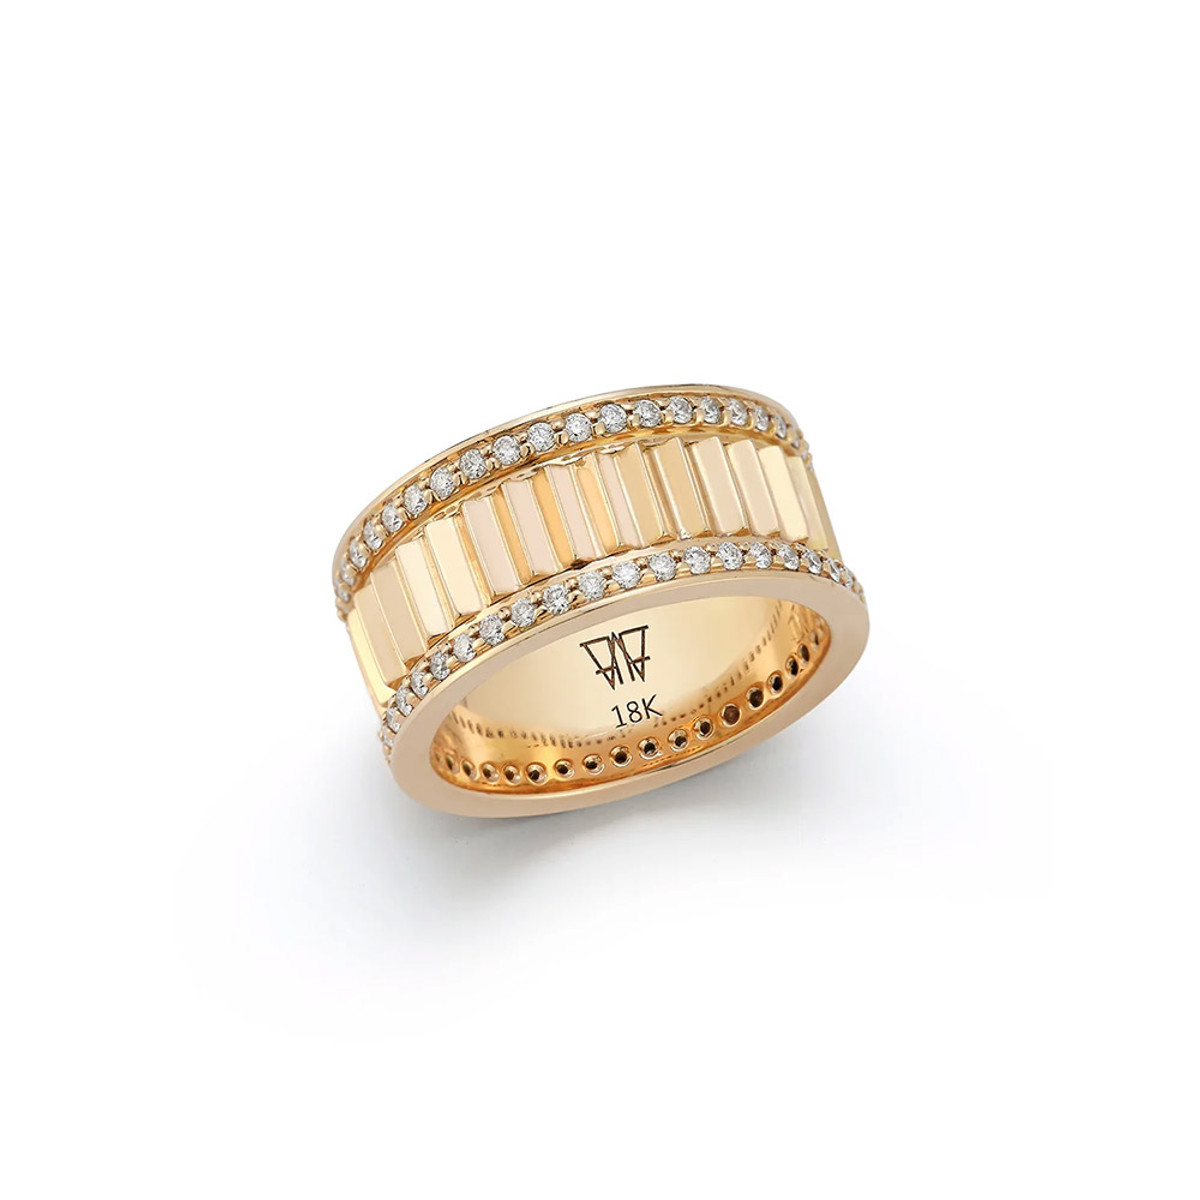 Walters Faith Clive 18K Rose Gold & Diamond 10MM Fluted Band Ring-47157 Product Image